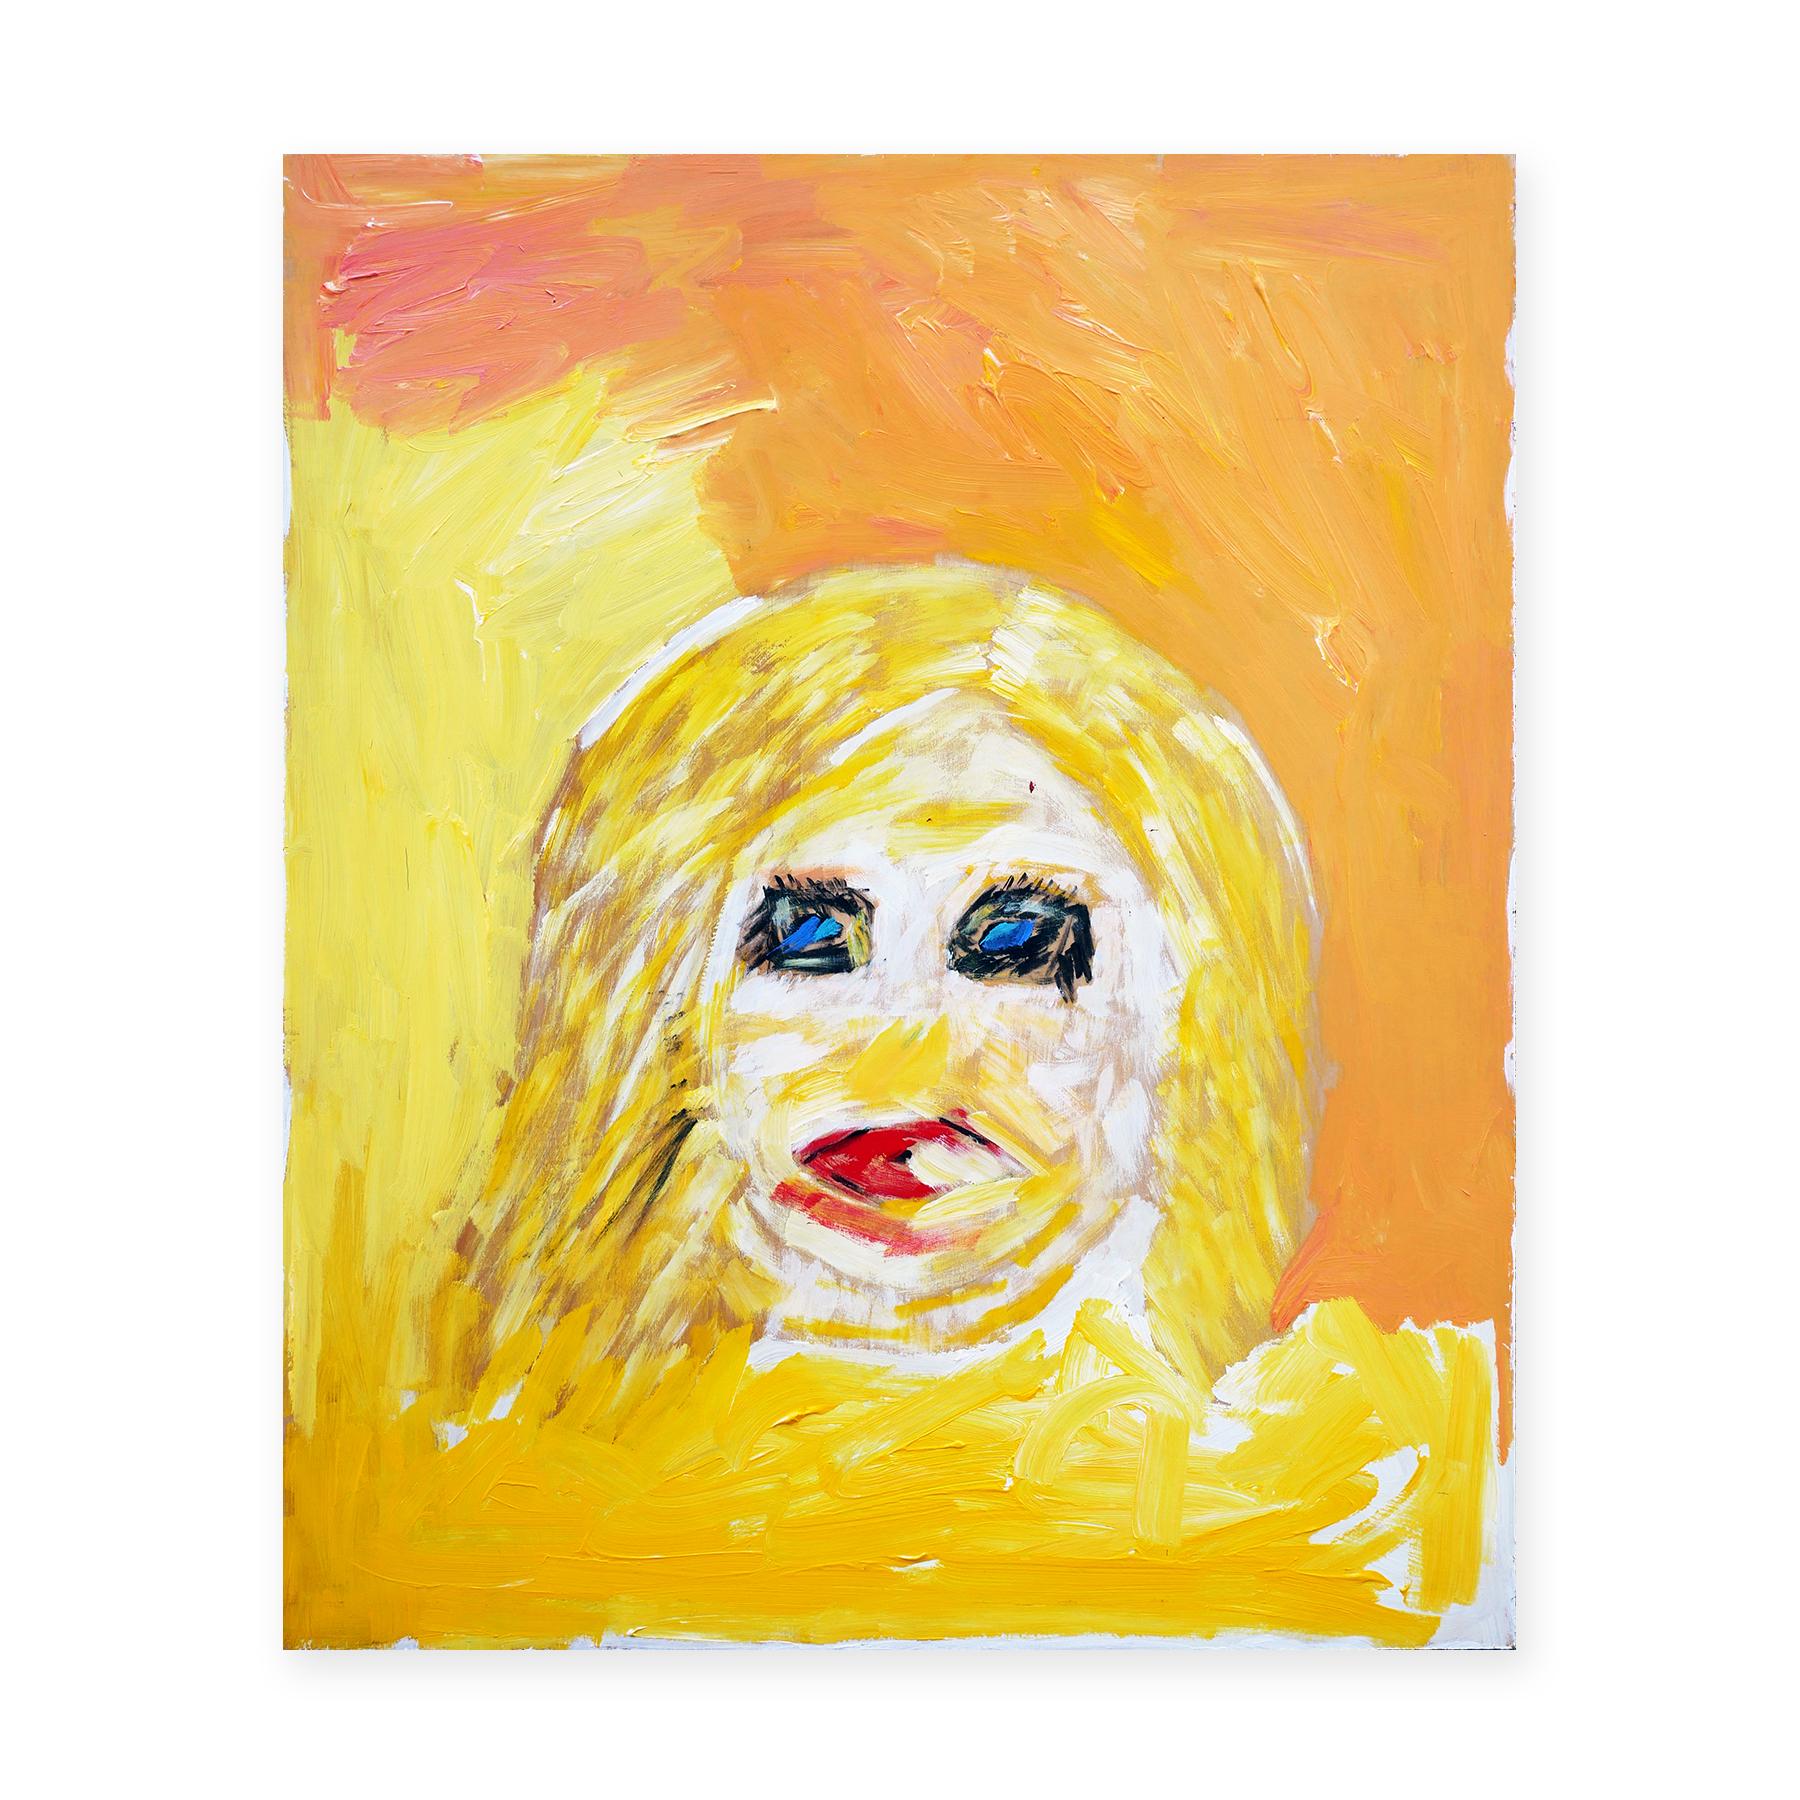 Orange and Yellow-Toned Abstract Figurative Portrait of a Blonde Woman - Painting by Paul Reeves